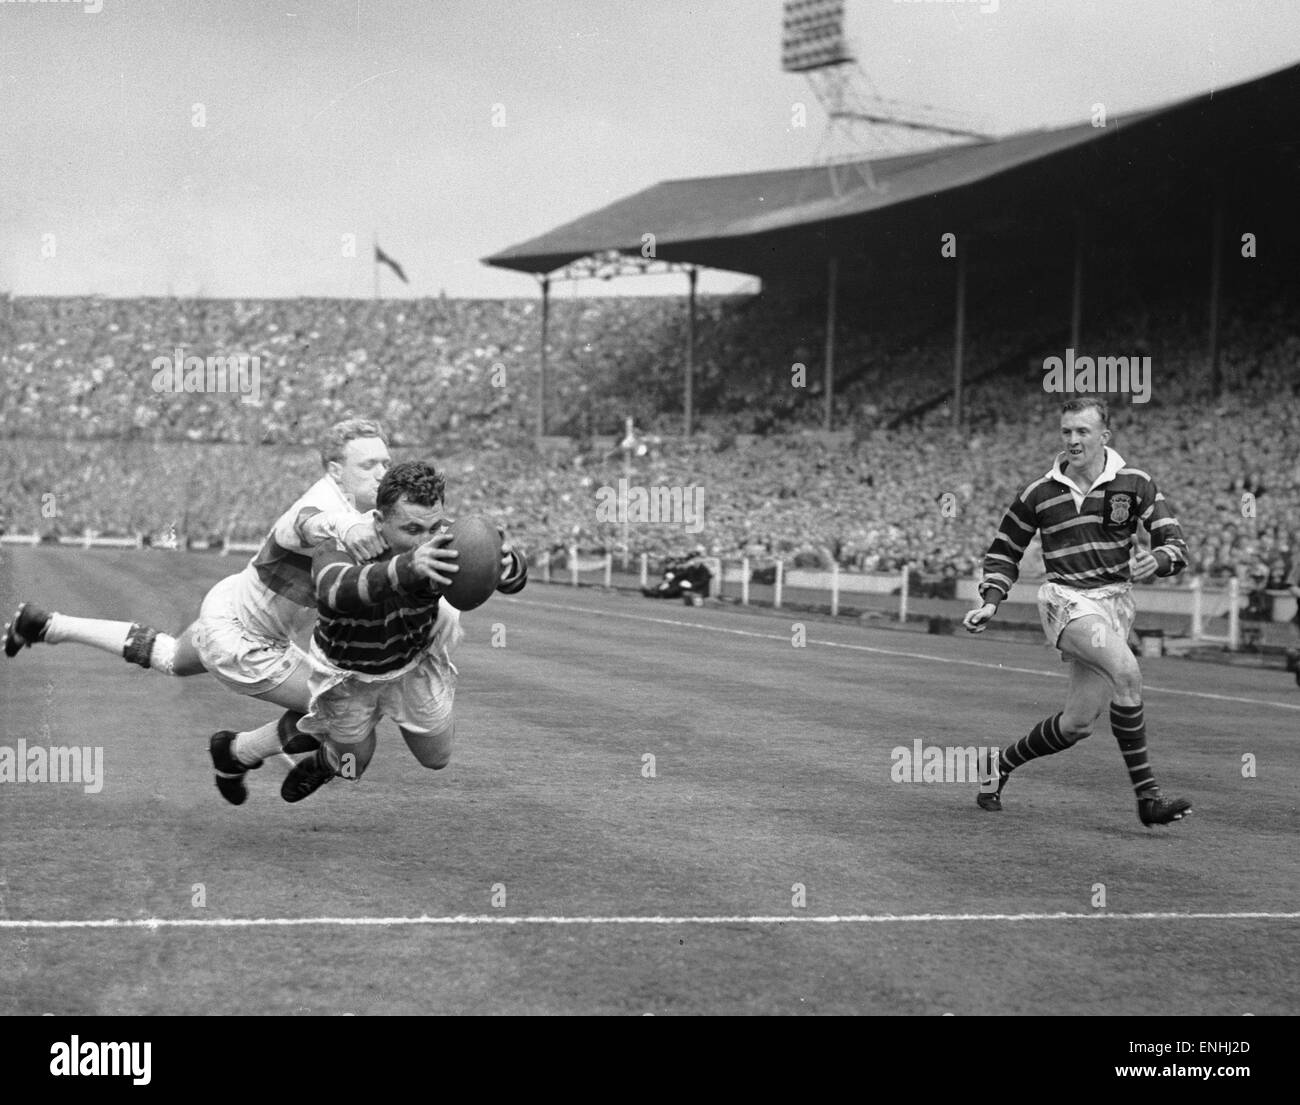 Rugby league action scoring Black and White Stock Photos & Images - Alamy